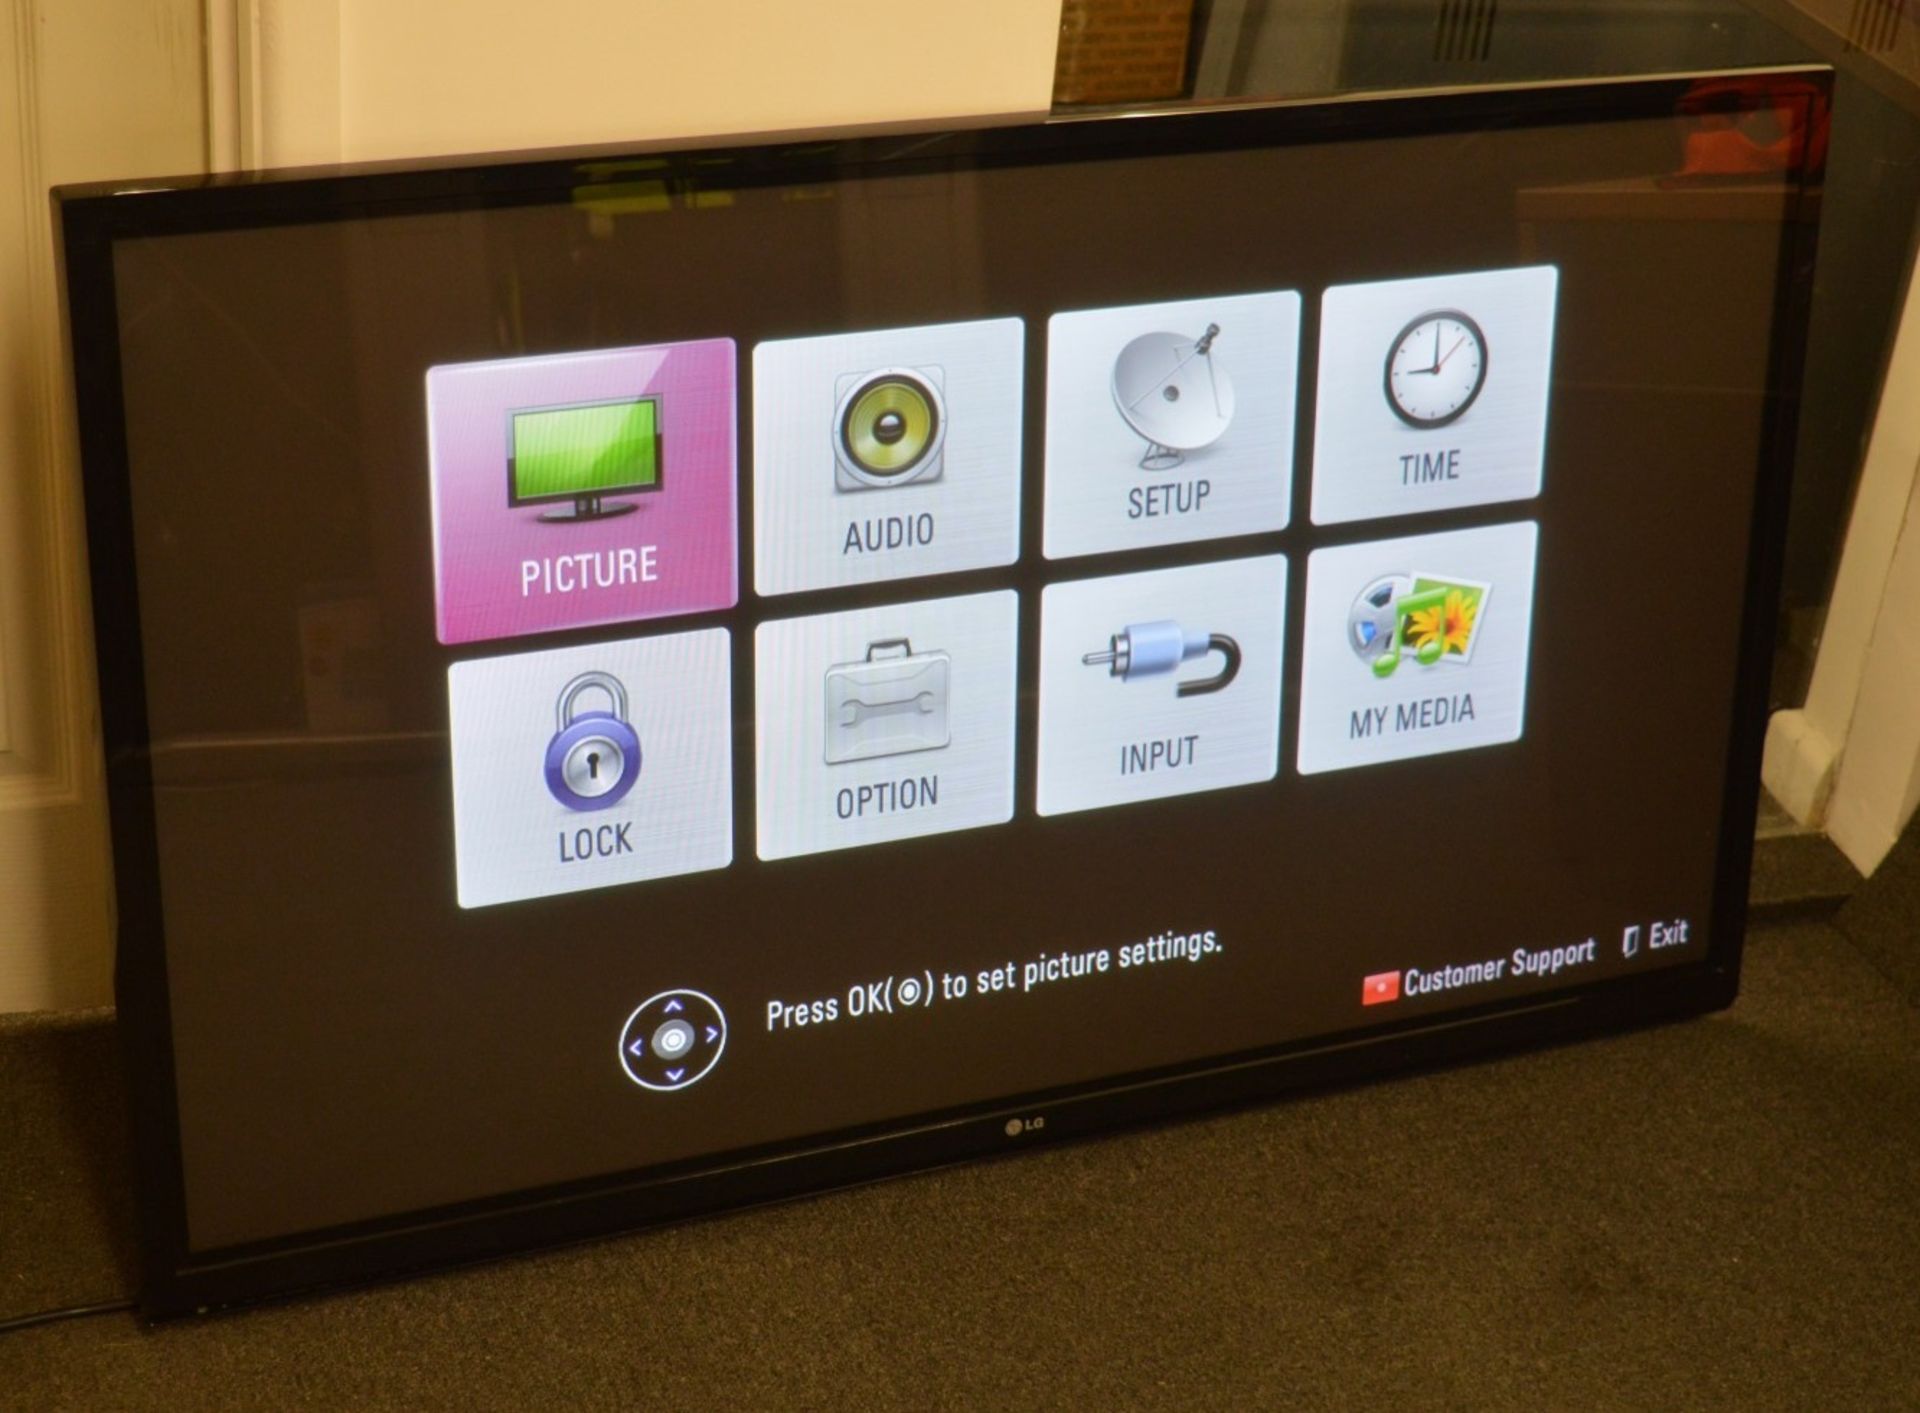 1 x LG 50PA4500 50-inch HD Ready Plasma TV with Freeview and 2 HDMI Ports - CL150 - Working As - Image 3 of 5